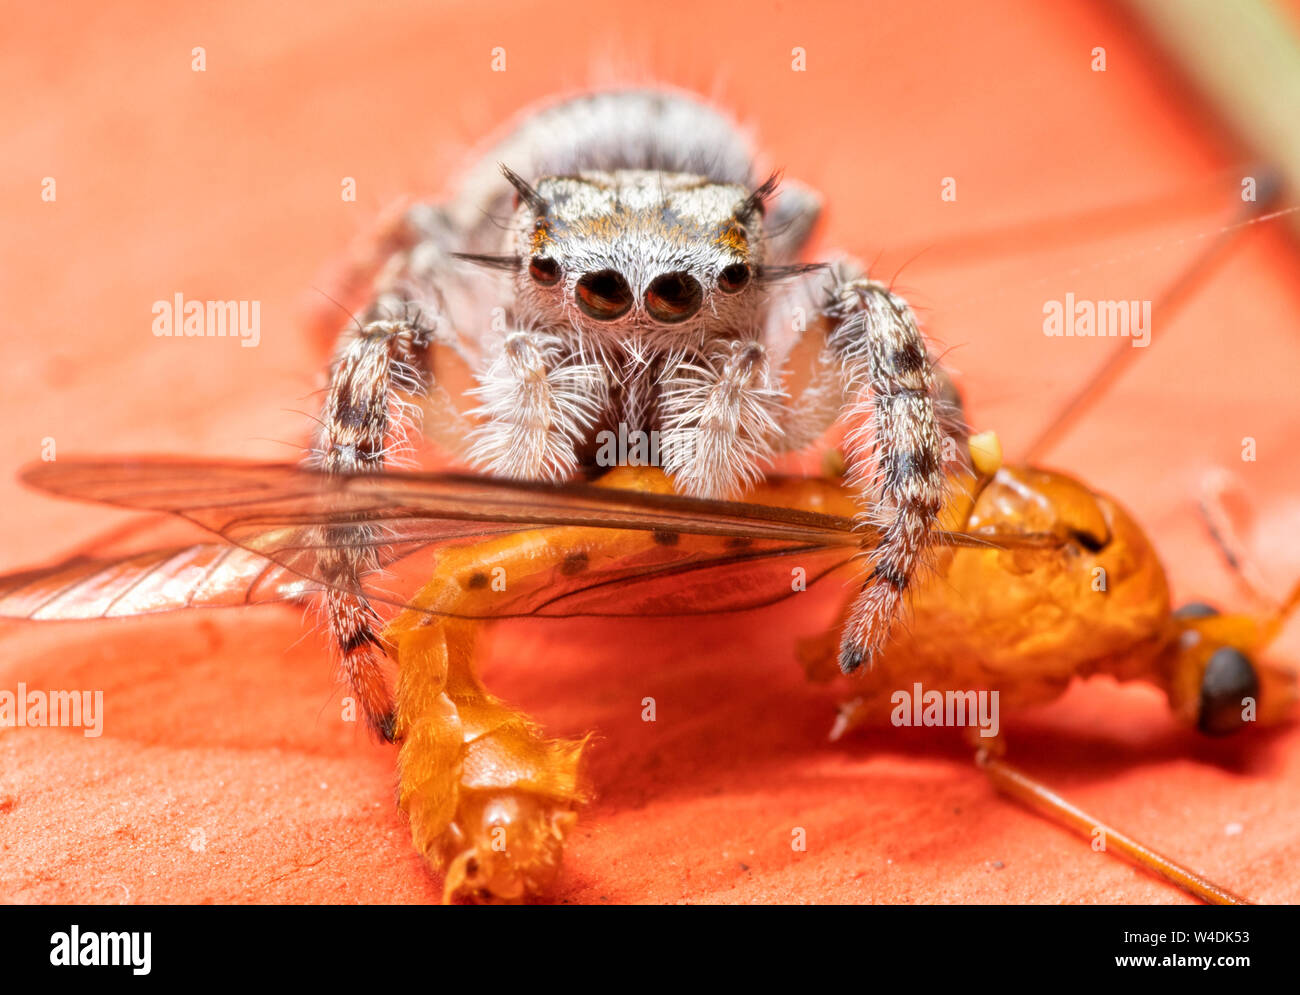 Immature Phidippus mystaceus jumping spider having lunch on a flying insect Stock Photo